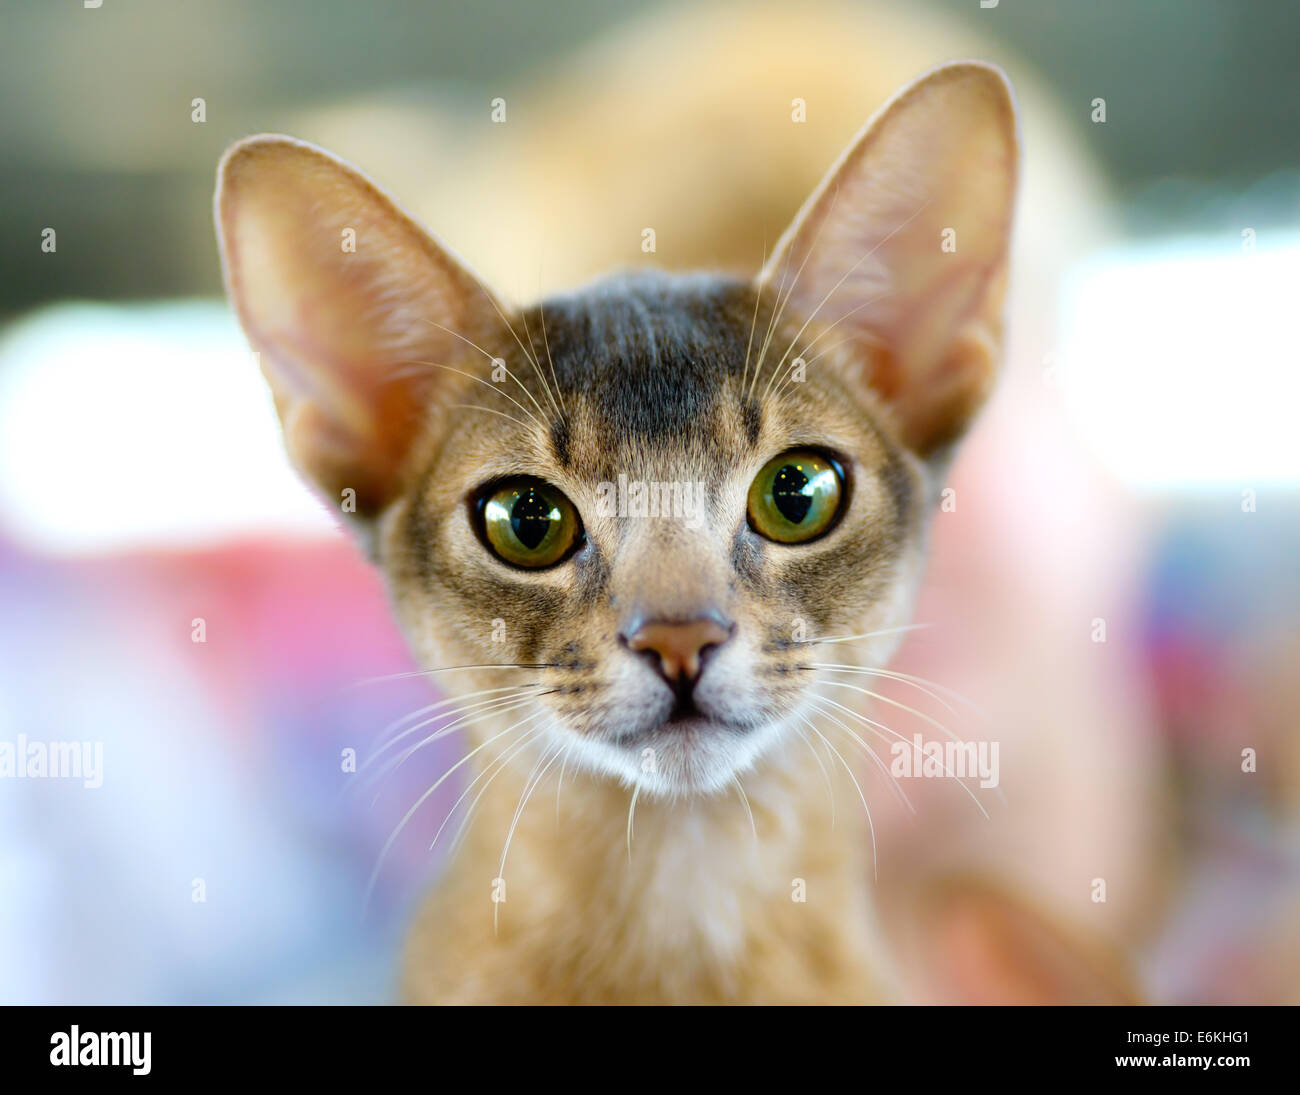 Animals: close-up portrait of young abyssinian cat Stock Photo